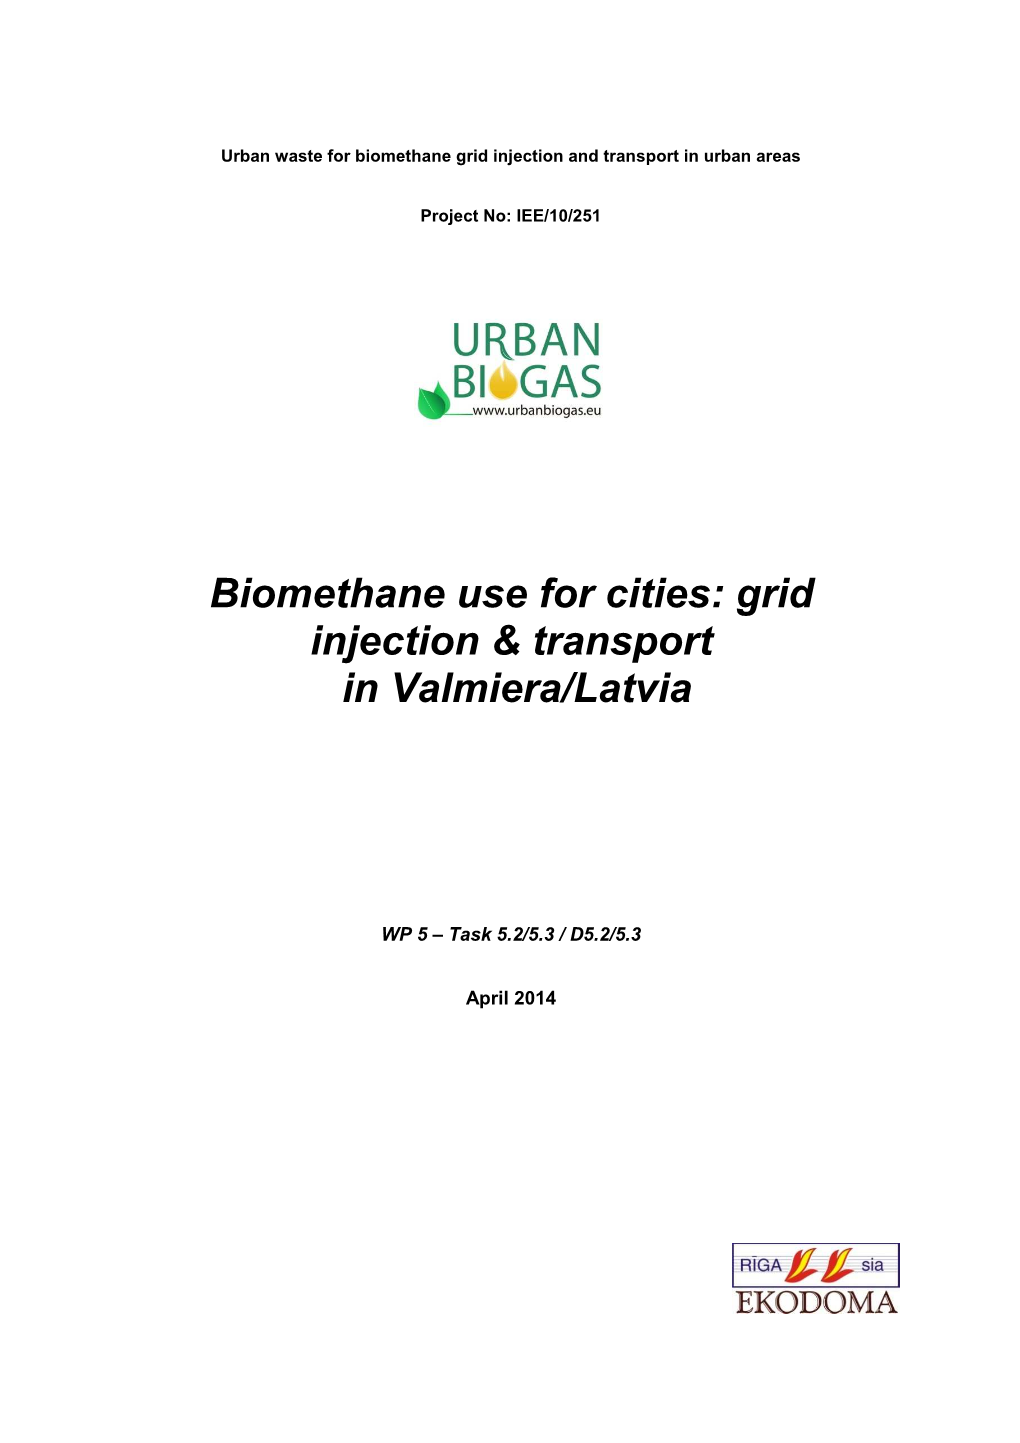 Biomethane Use for Cities: Grid Injection & Transport in Valmiera